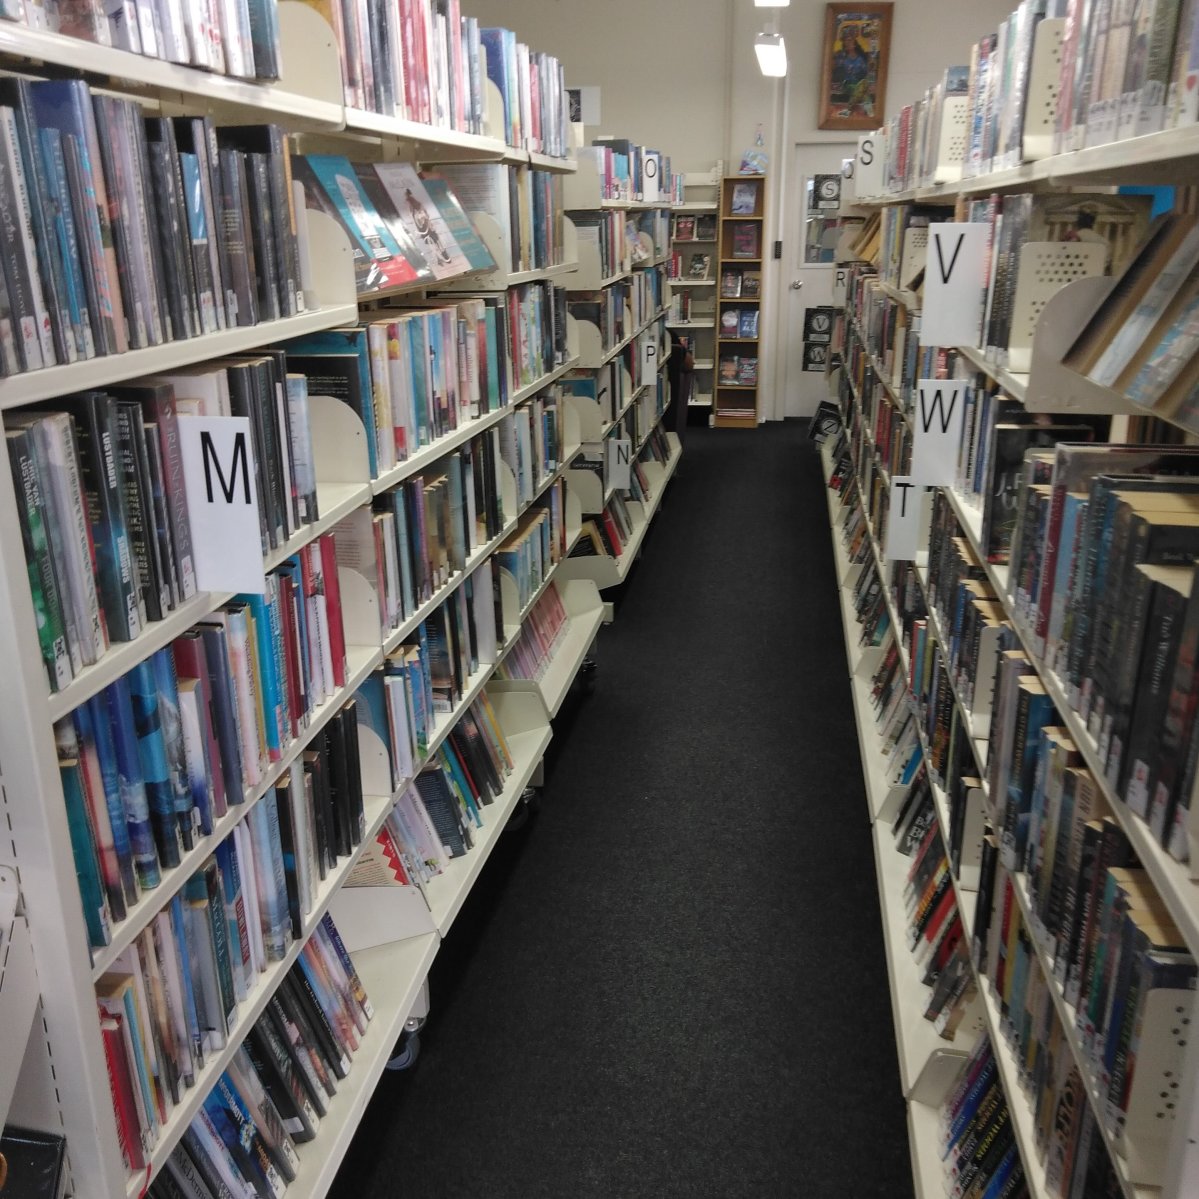 New library for Mangawhai? 